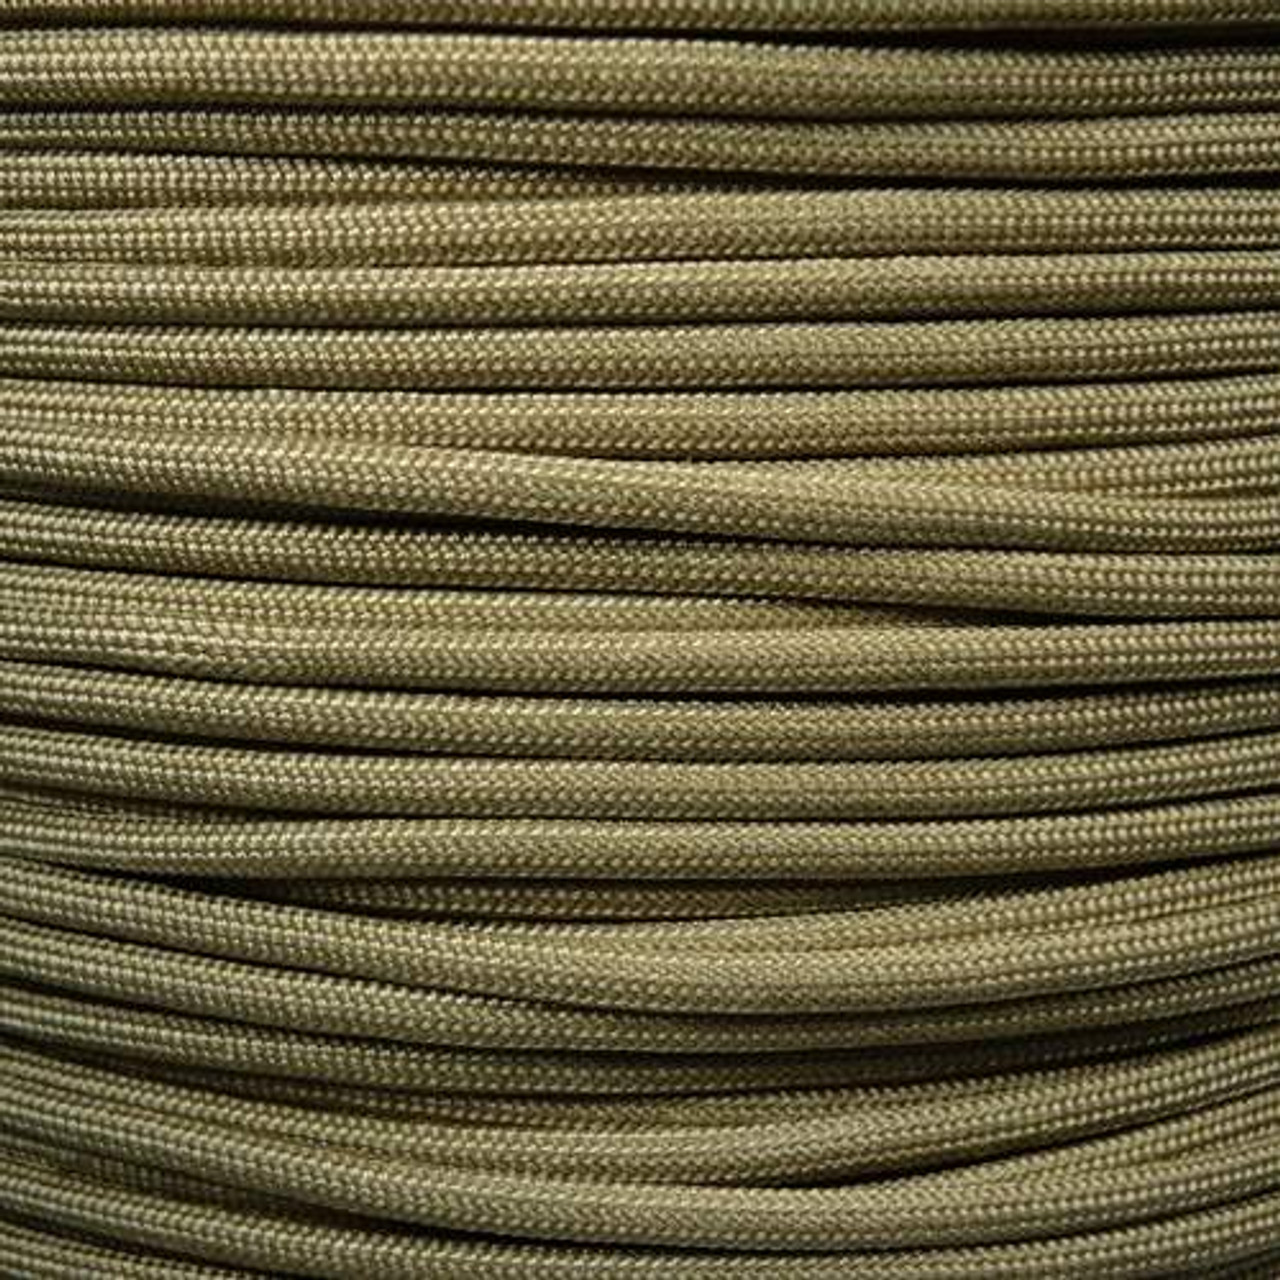 SPOOL 1000ft Paracord Tan 550 7 strand MADE IN USA